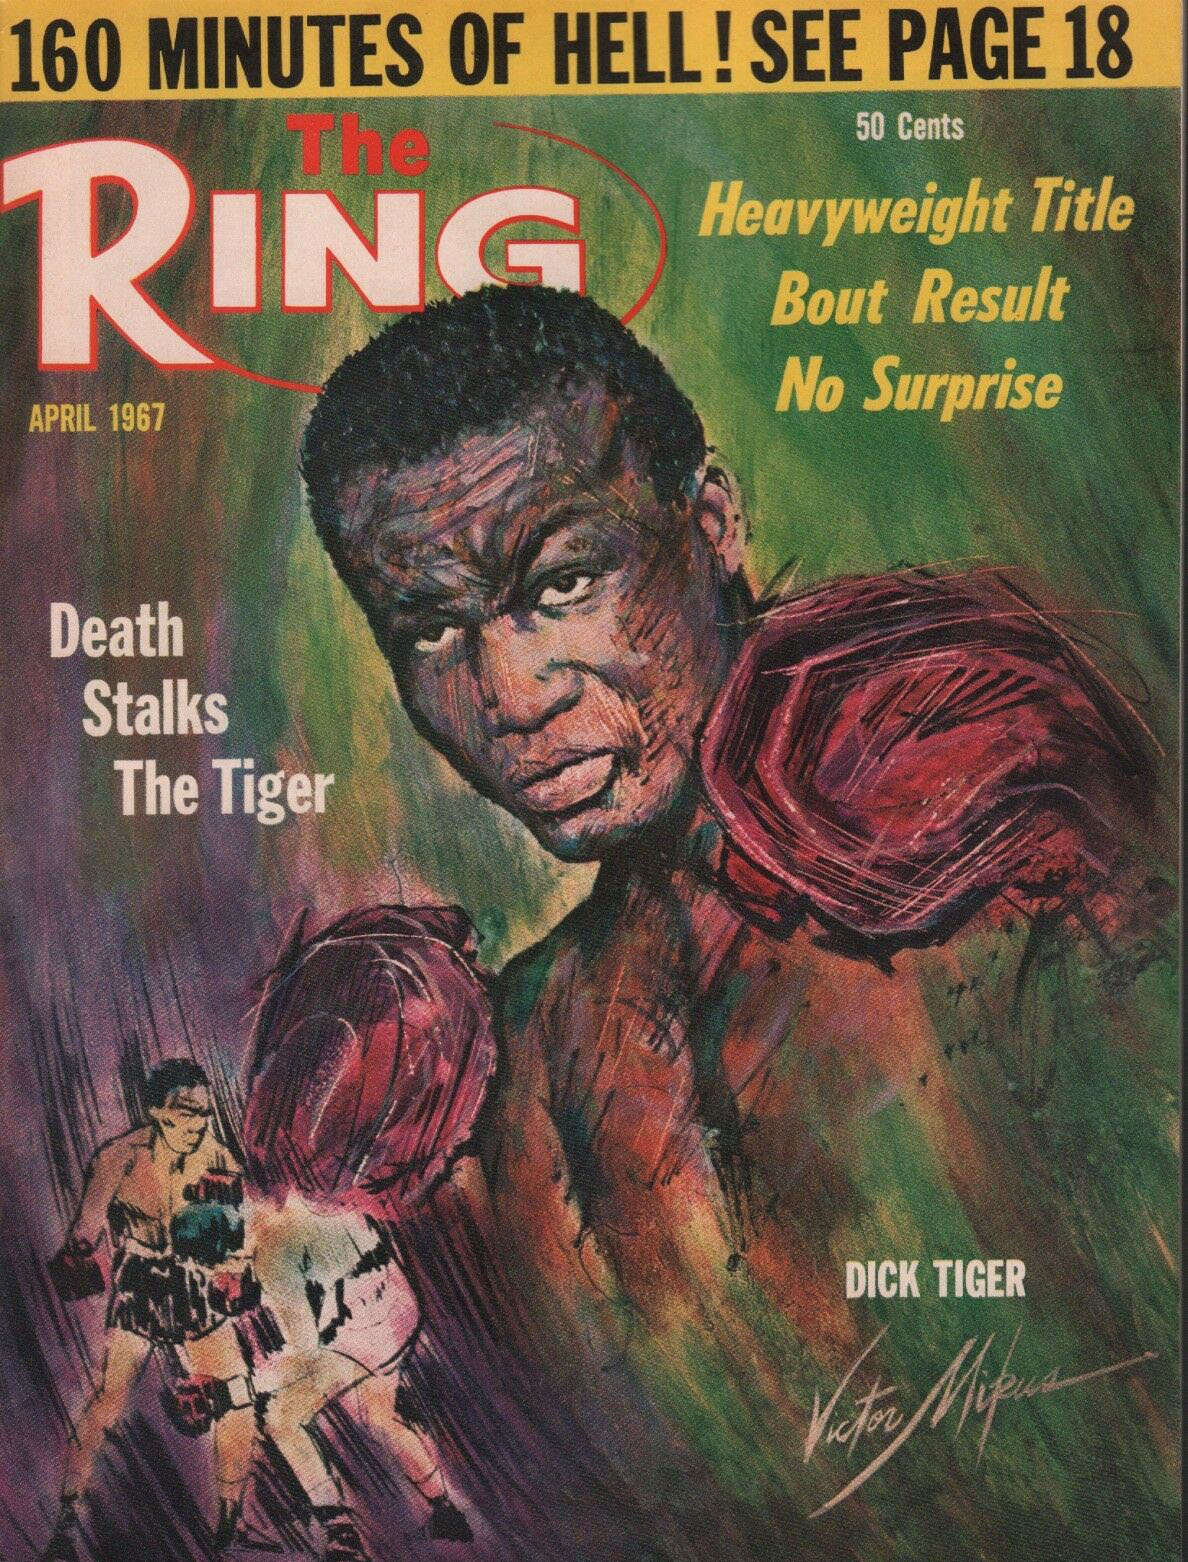 Ring, The April 1967, Ring, The April 1967 American boxing magazine back issue first published in 1922 by Sports & Entertainment Publications.  160 Minutes Of Hell ! See Page 18., 160 Minutes Of Hell ! See Page 18